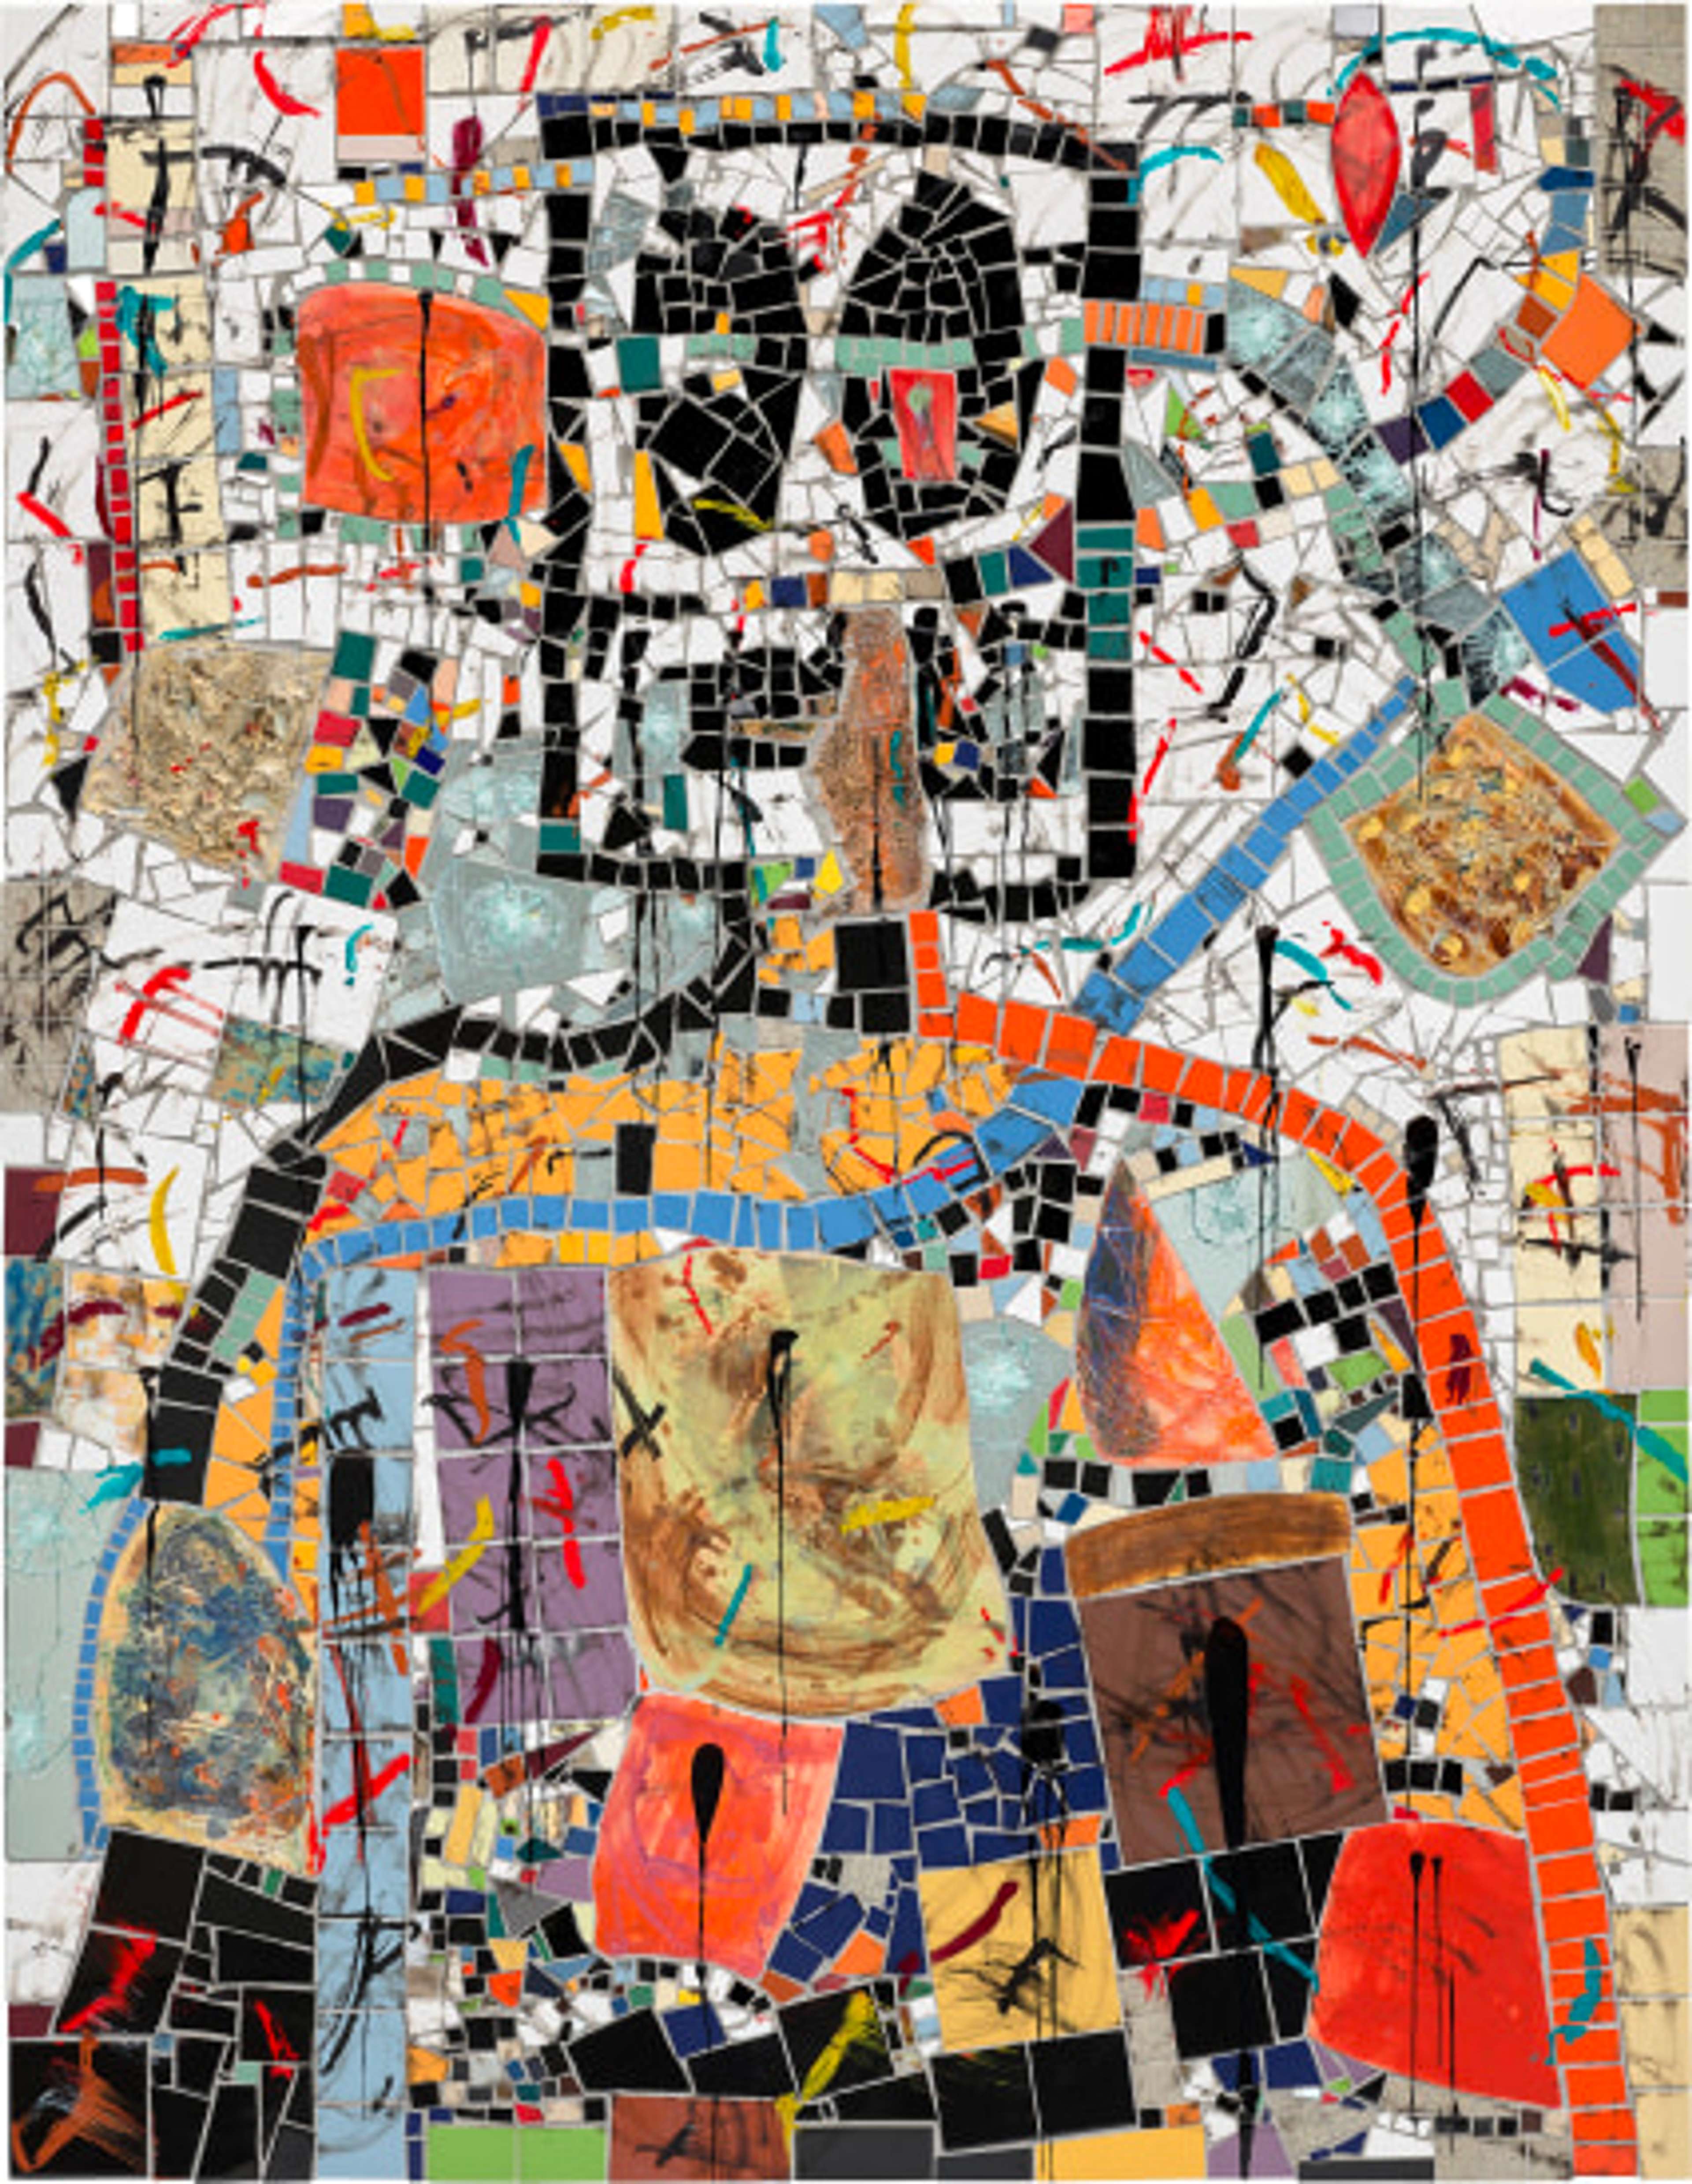  A Rashid Johnson piece featuring a figure with strong shoulders and a box-like face defined by black and orange tiles. It contrasts against a vibrant backdrop created through an abstract composition of multicoloured tiles.